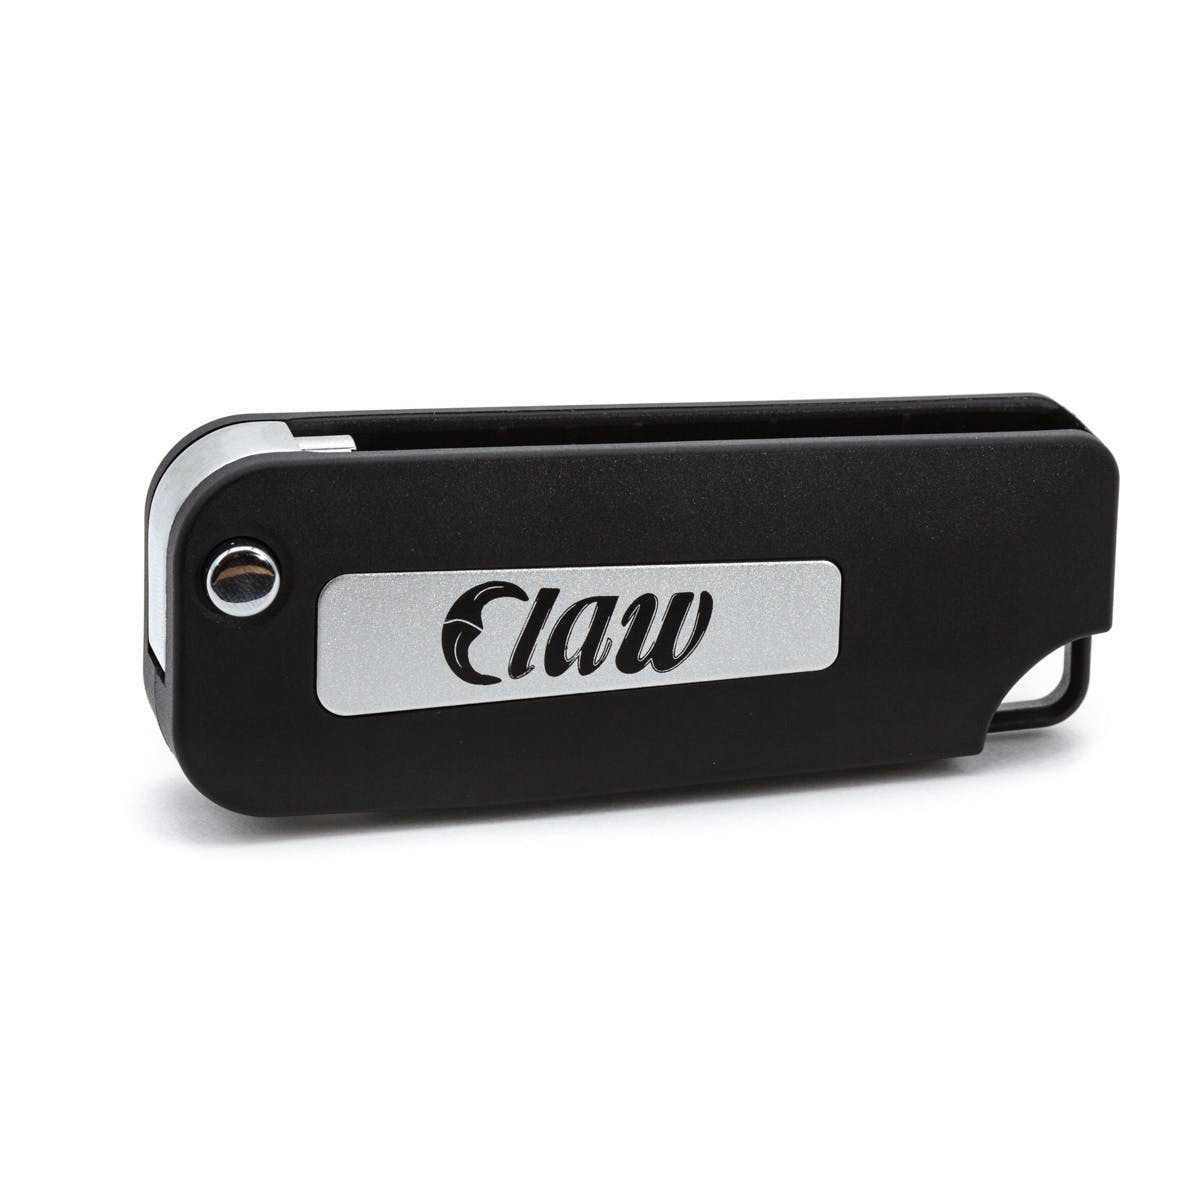 Claw Concentrates Flip Battery